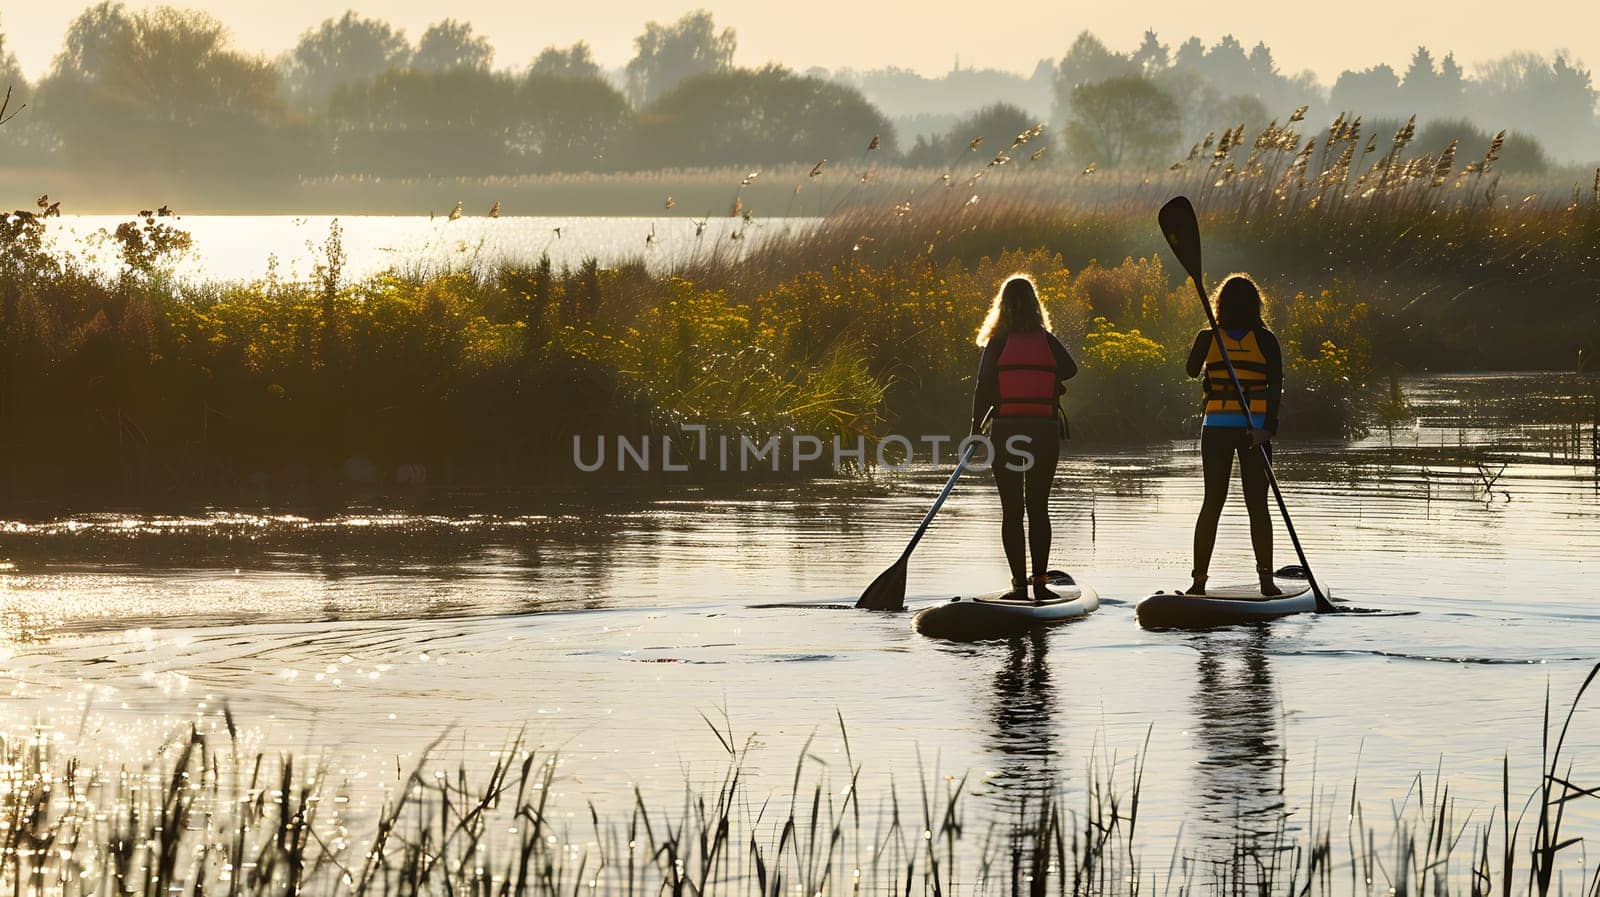 Two people paddle boarding in the lake, enjoying the natural landscape and sky by Nadtochiy